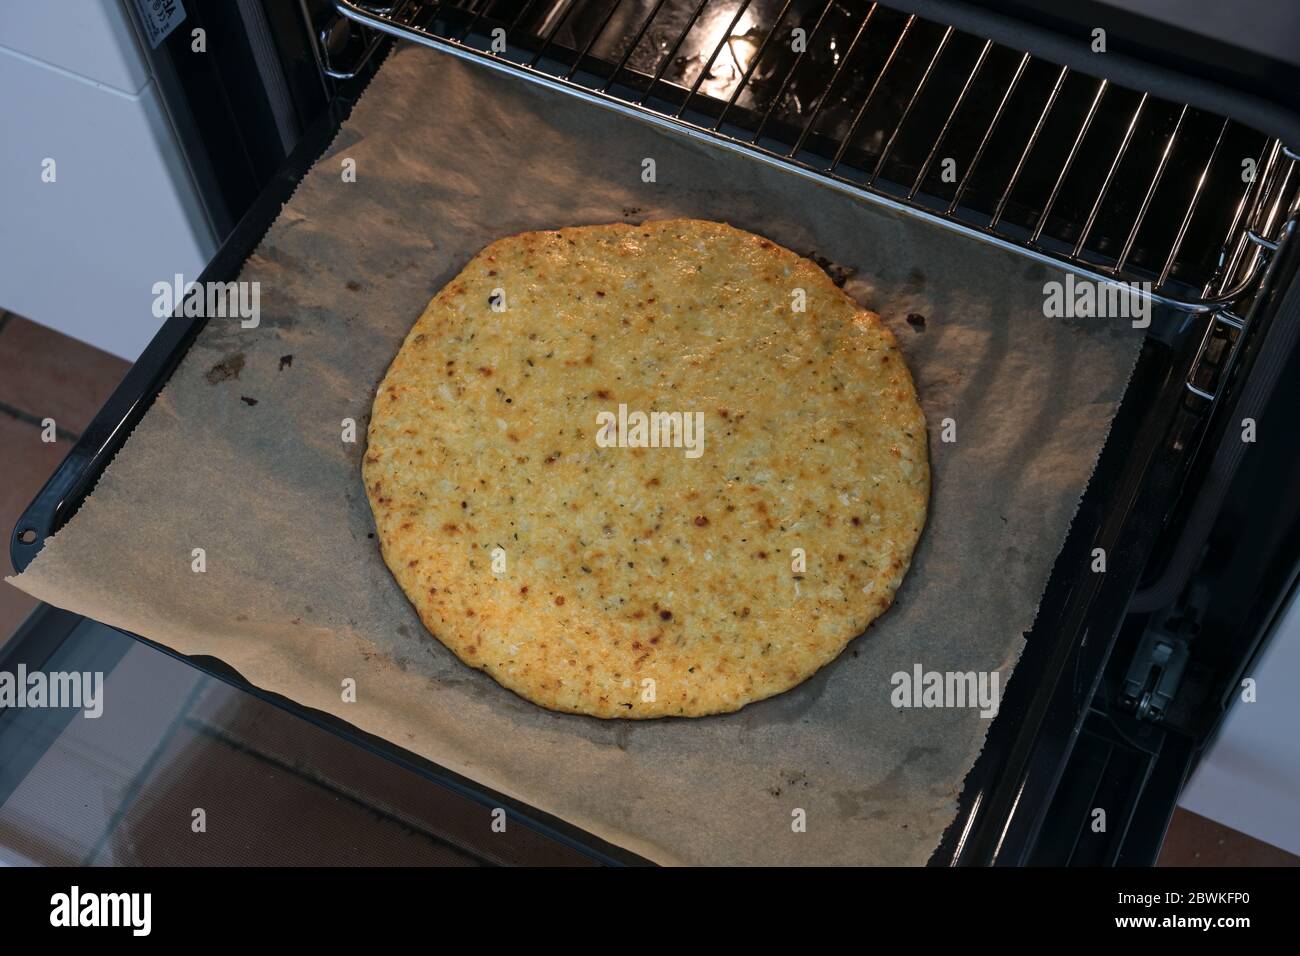 Baked pizza crust from shredded cauliflower and cheese on a baking tray in the oven, healthy slimming alternative for low carb and ketogenic diet, sel Stock Photo